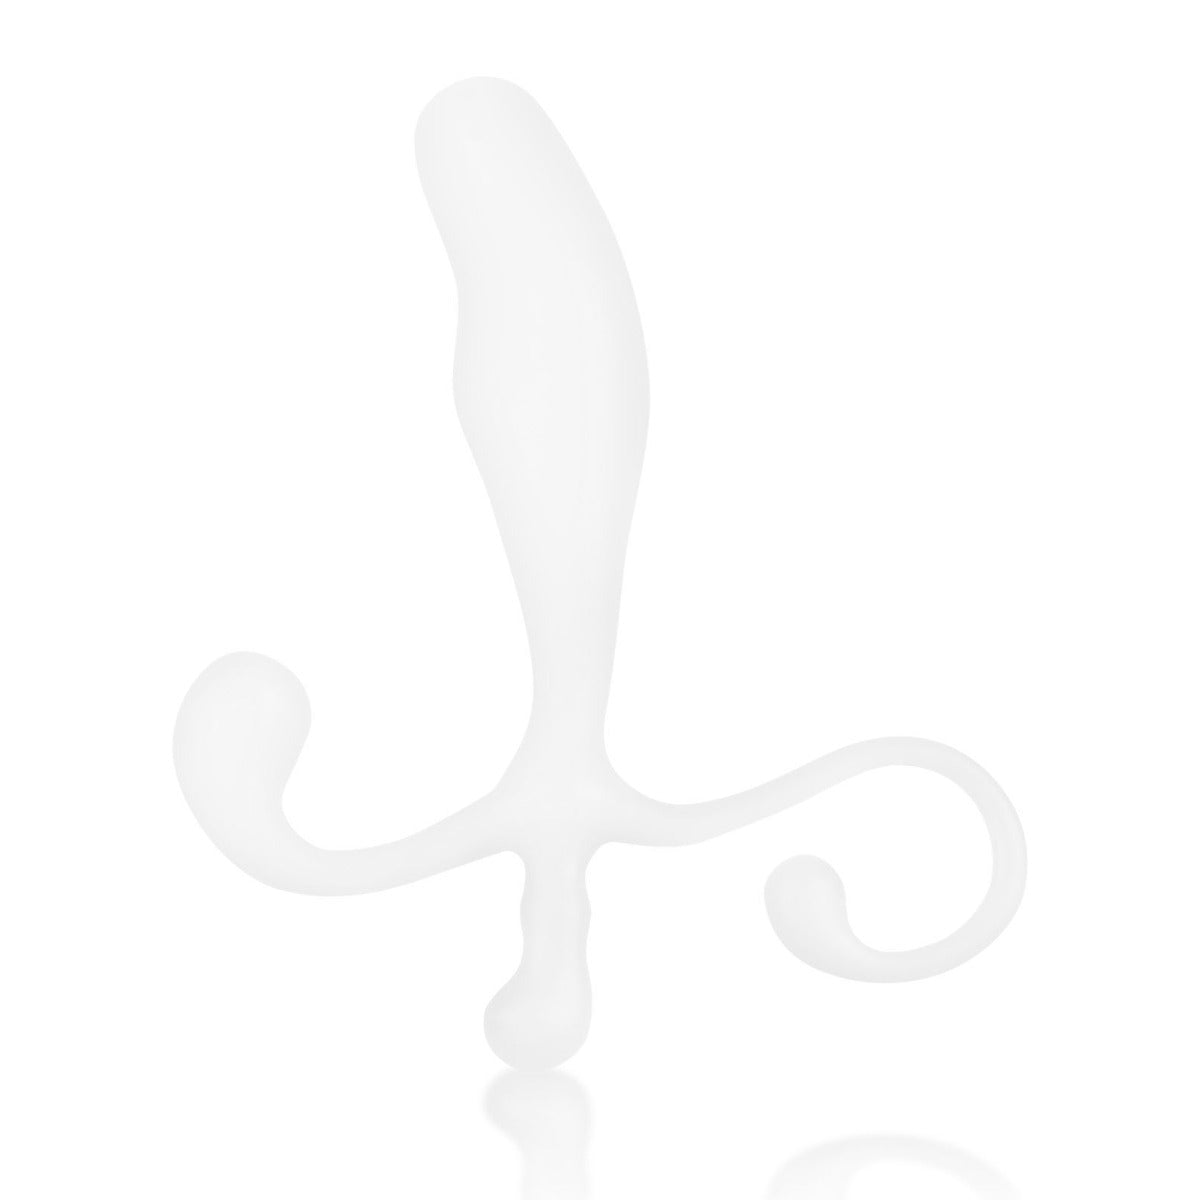 Blue Line Male P-Spot Anal Massager White 5 Inch - Simply Pleasure